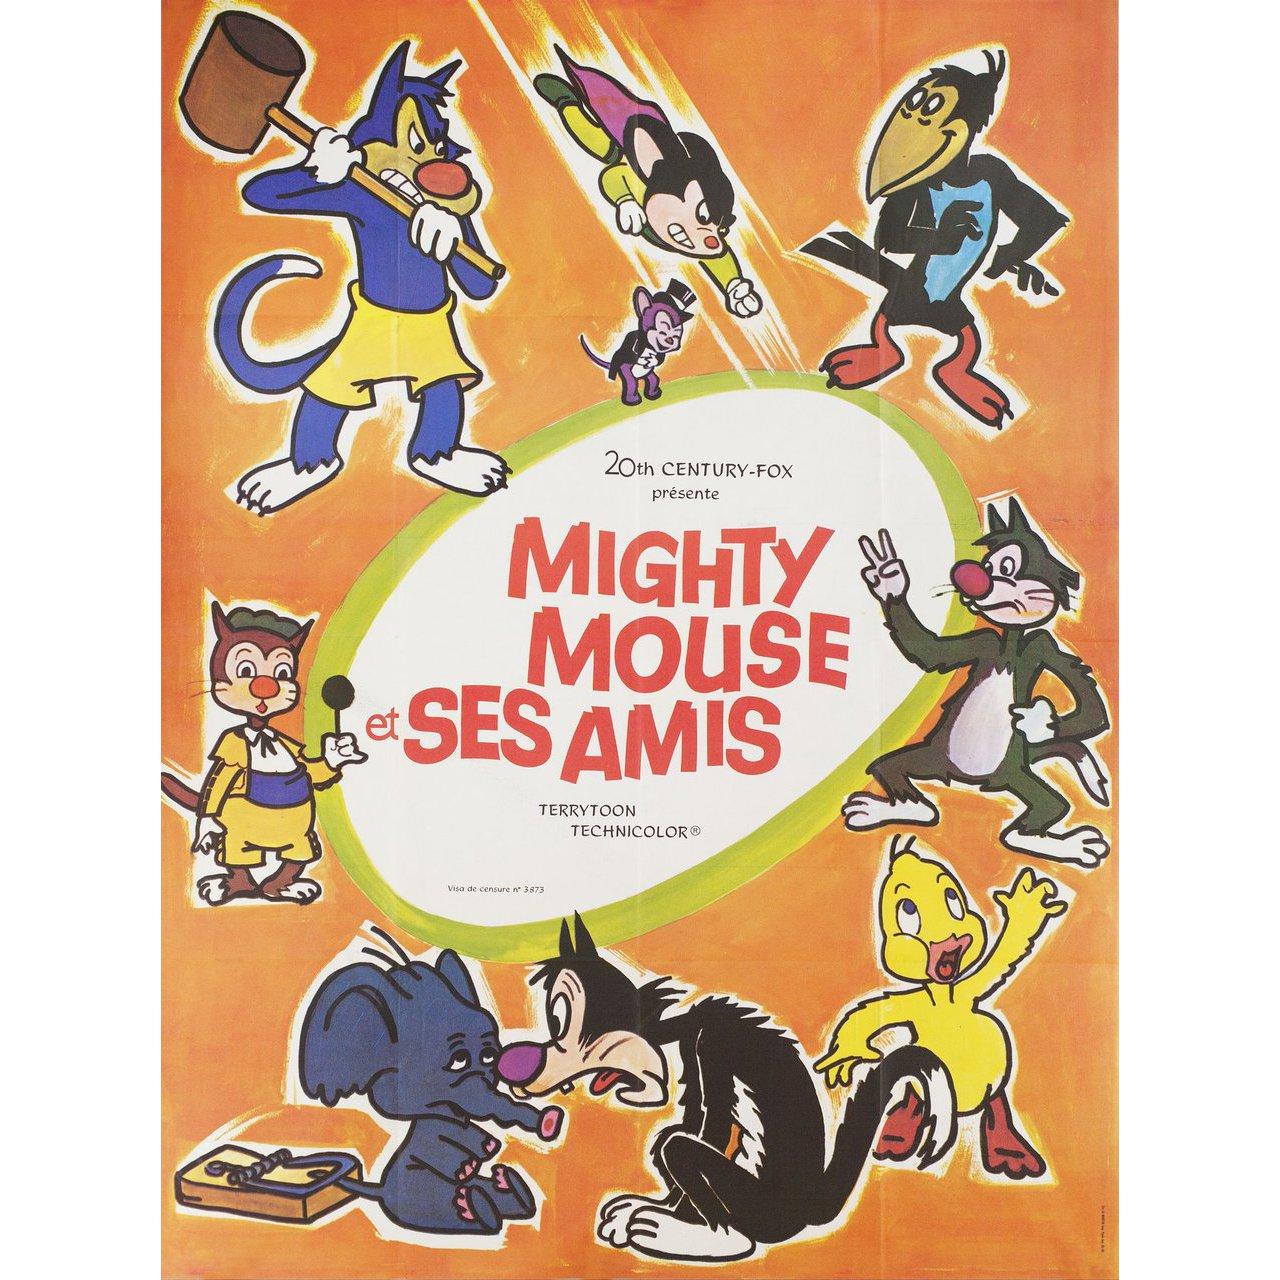 Original 1970s French Grande poster for the anthology Mighty Mouse et ses amis (Mighty Mouse and Friends). Very good-fine condition, folded. Many original posters were issued folded or were subsequently folded. Please note: the size is stated in